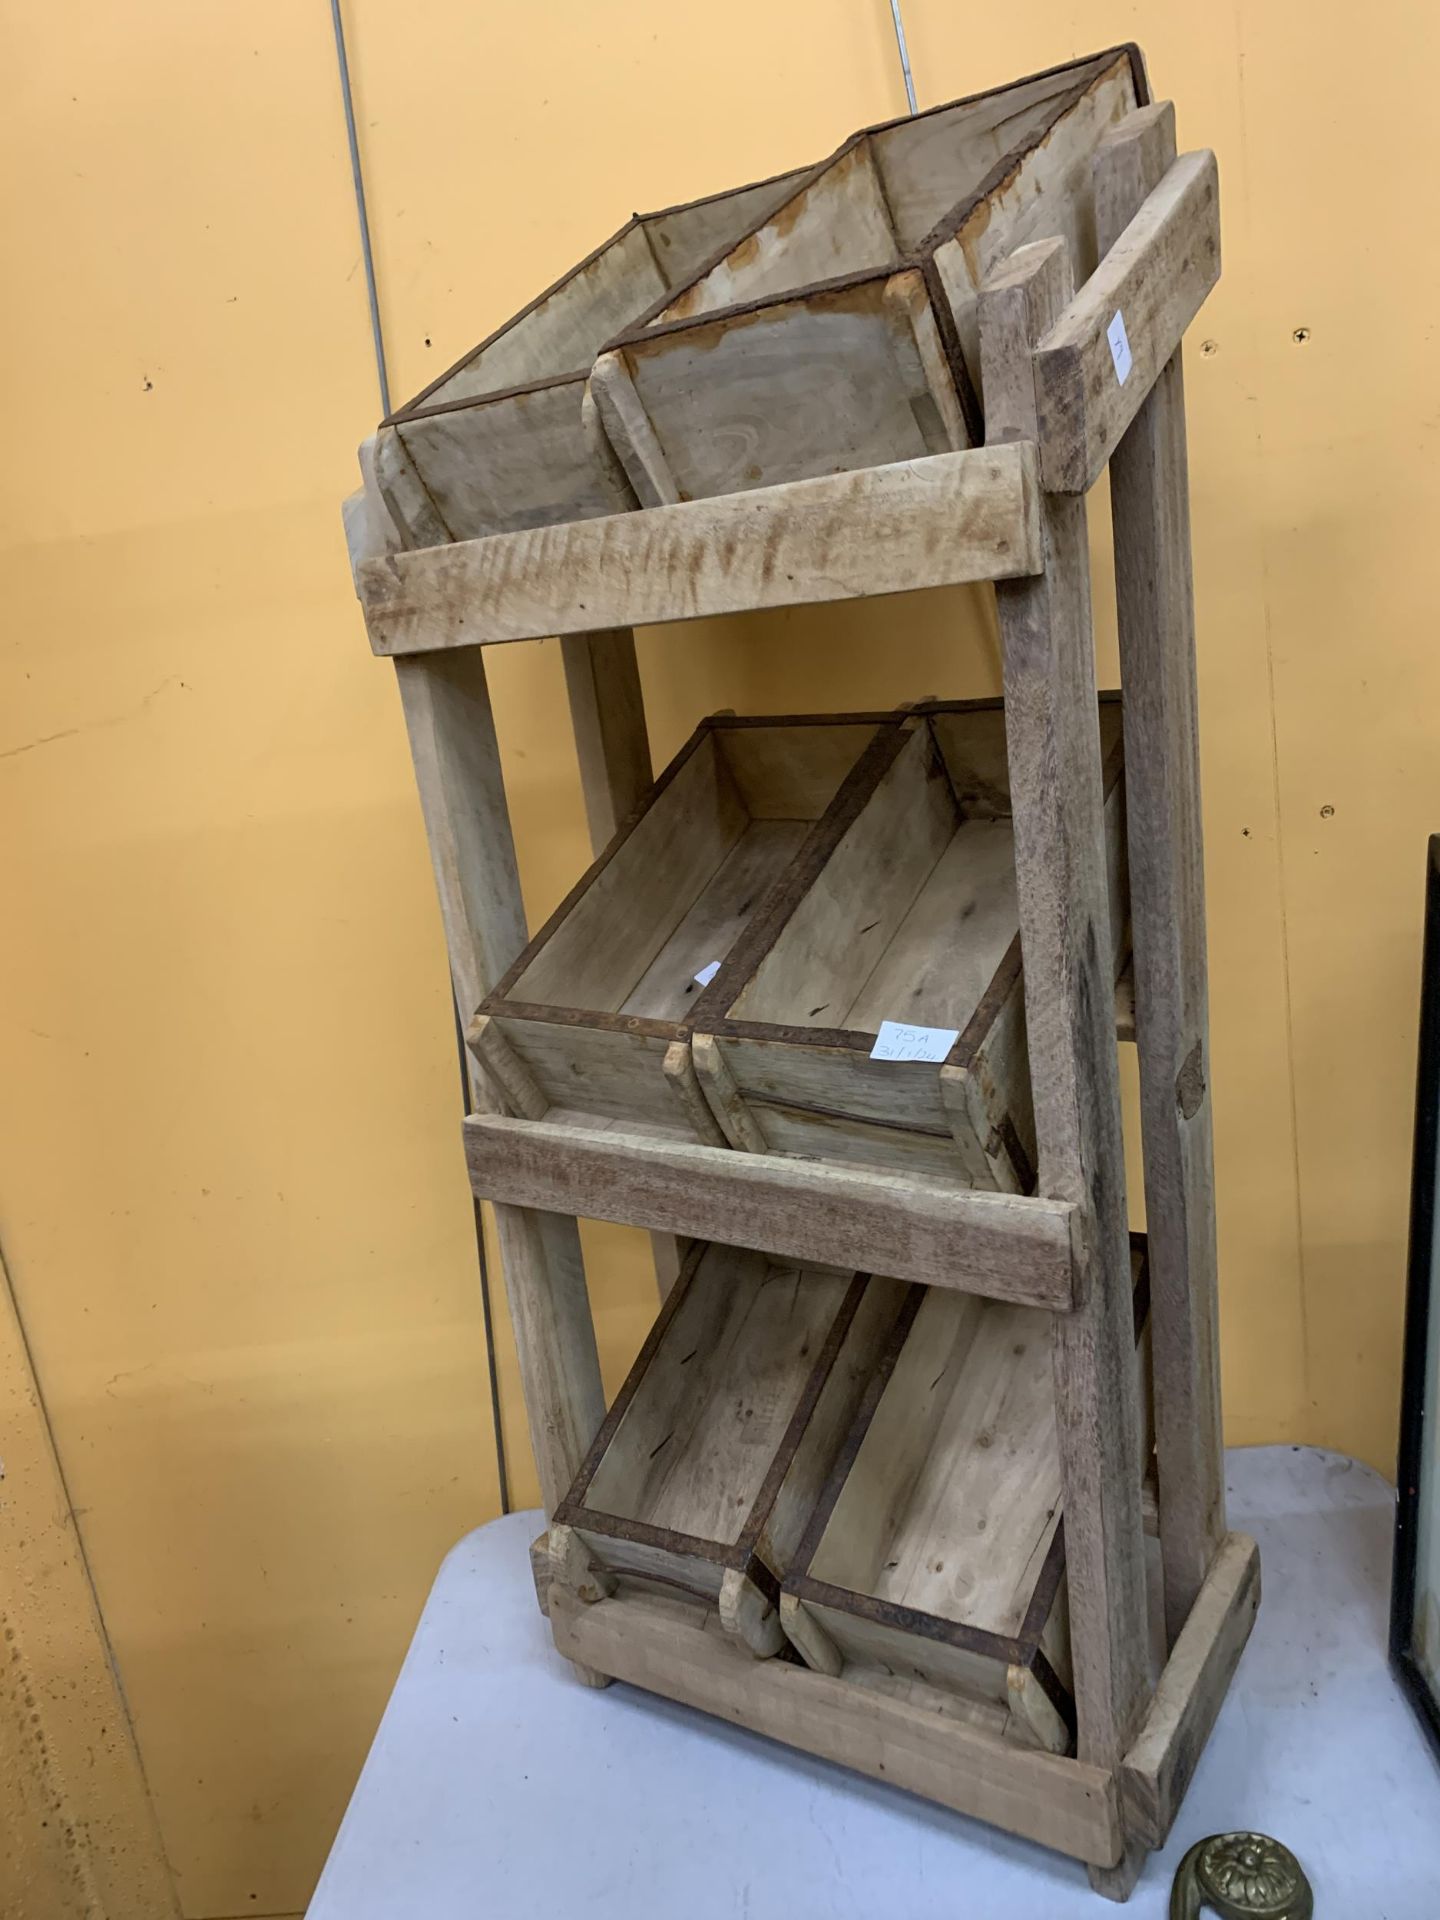 A WOODEN STORAGE RACK WITH SIX BRICK MOULD BOXES - Image 2 of 3